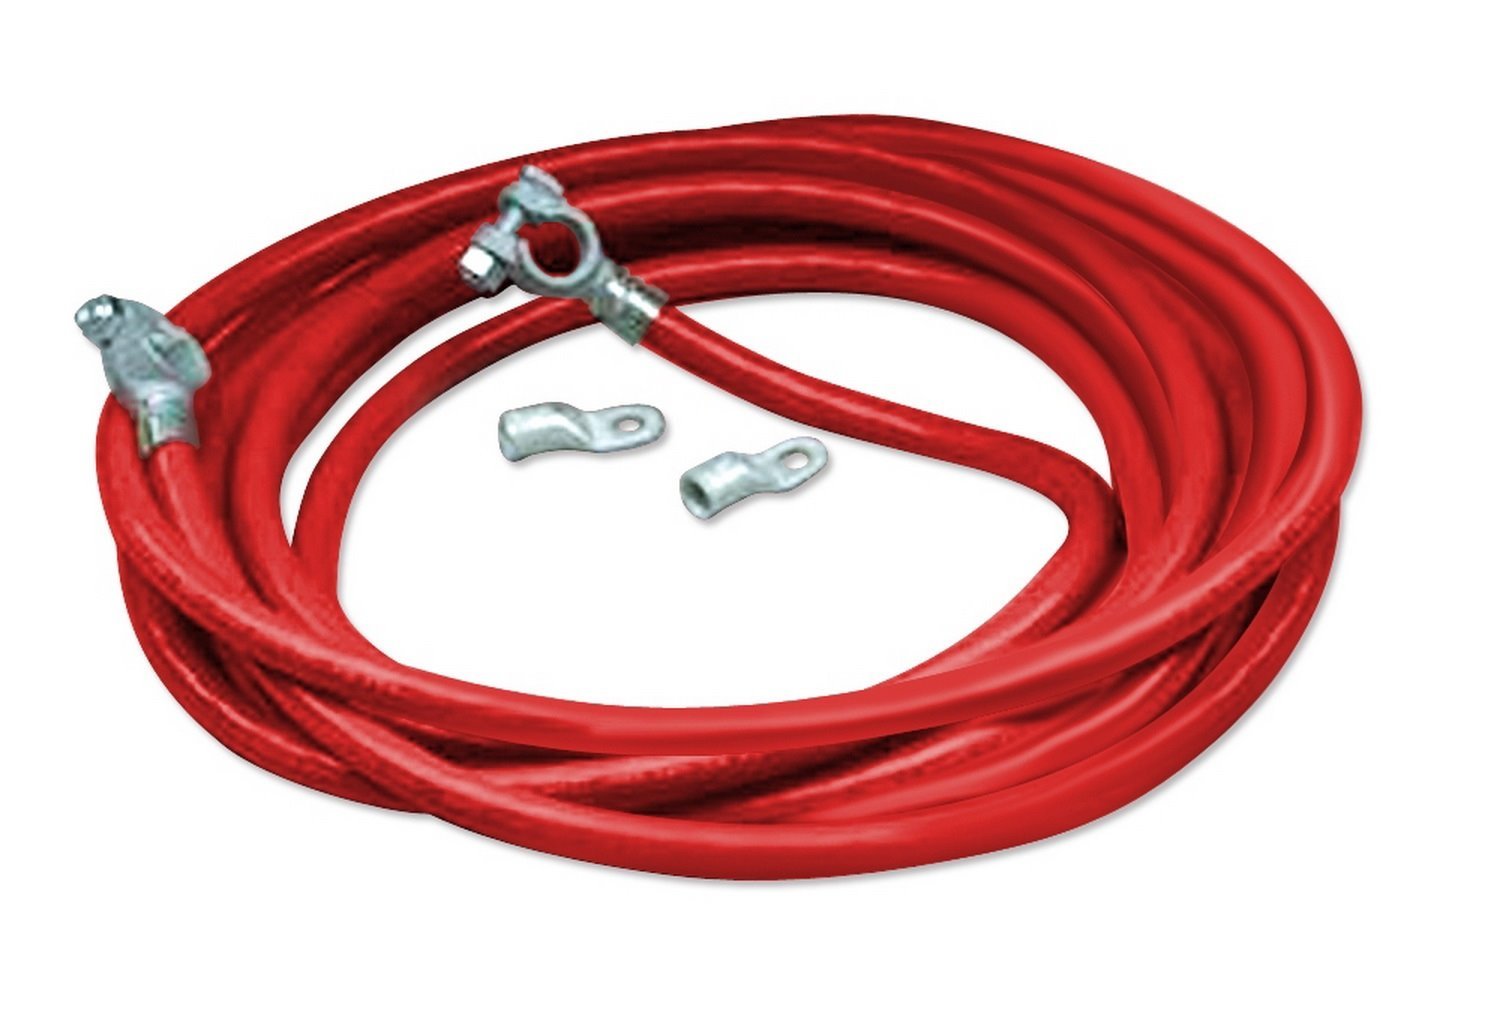 Battery Cable Kit 20' Length, 1/0 Gauge